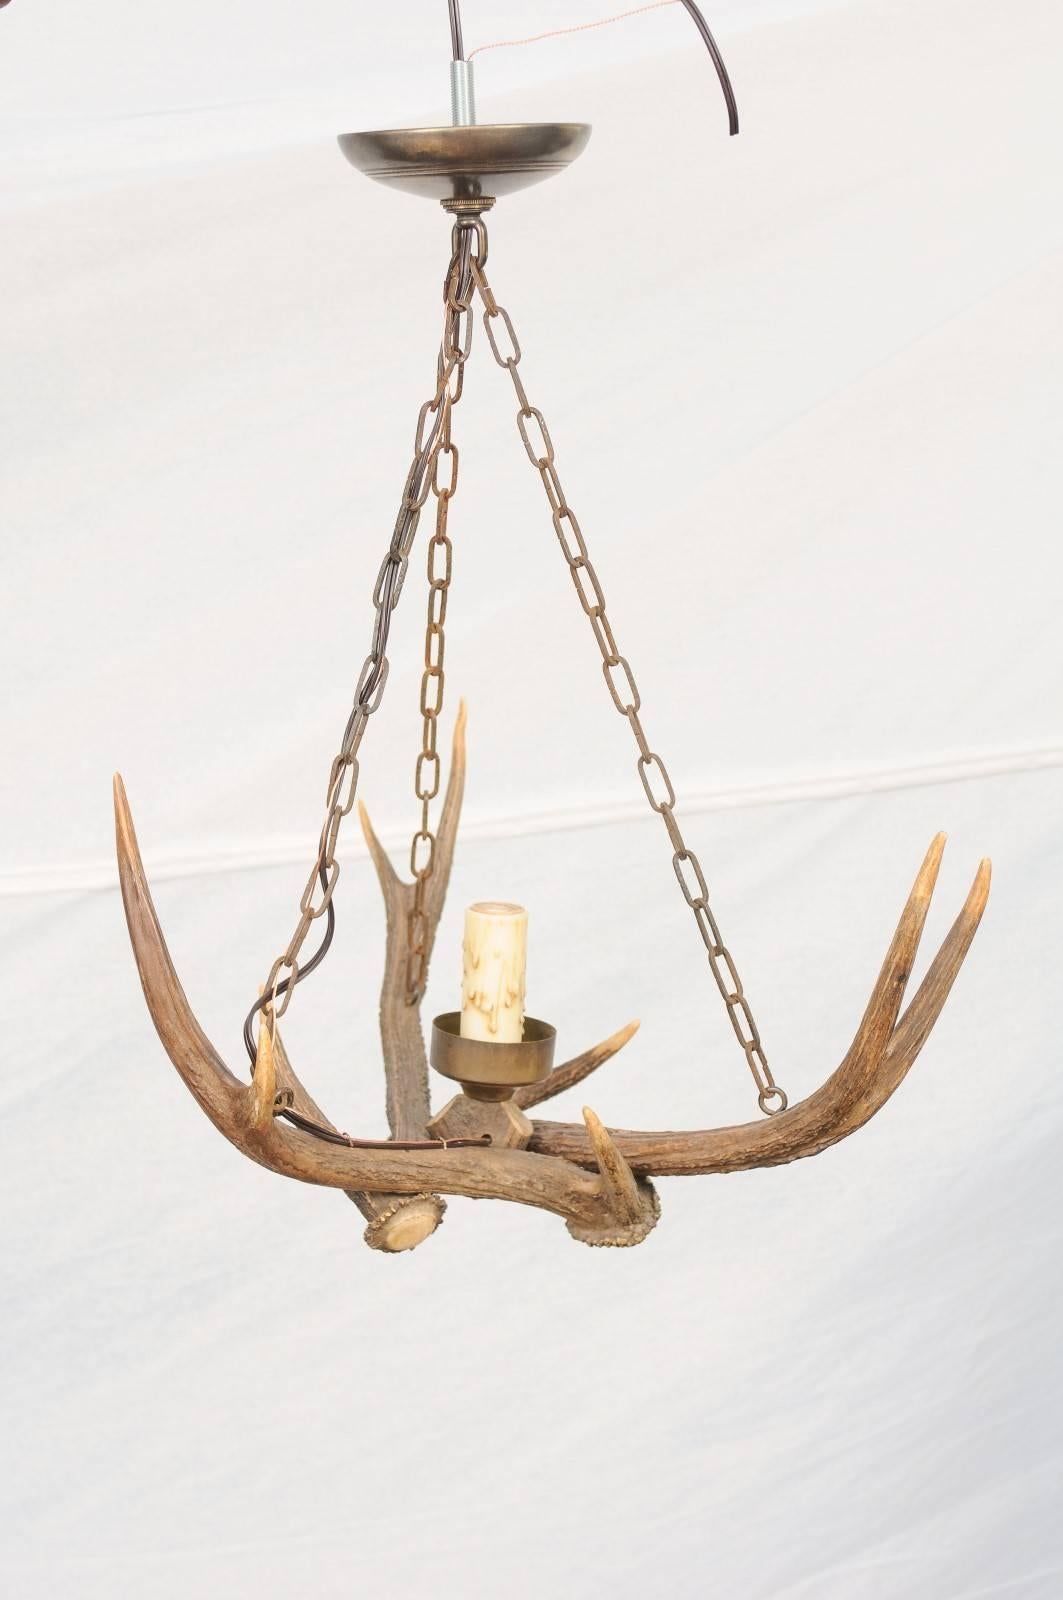 This French antlers chandelier from the early 20th century features a central single light concealed inside an authentic wax candle sleeve. We currently have two available, priced and sold individually. Raised on a simple round metal bobèche, the